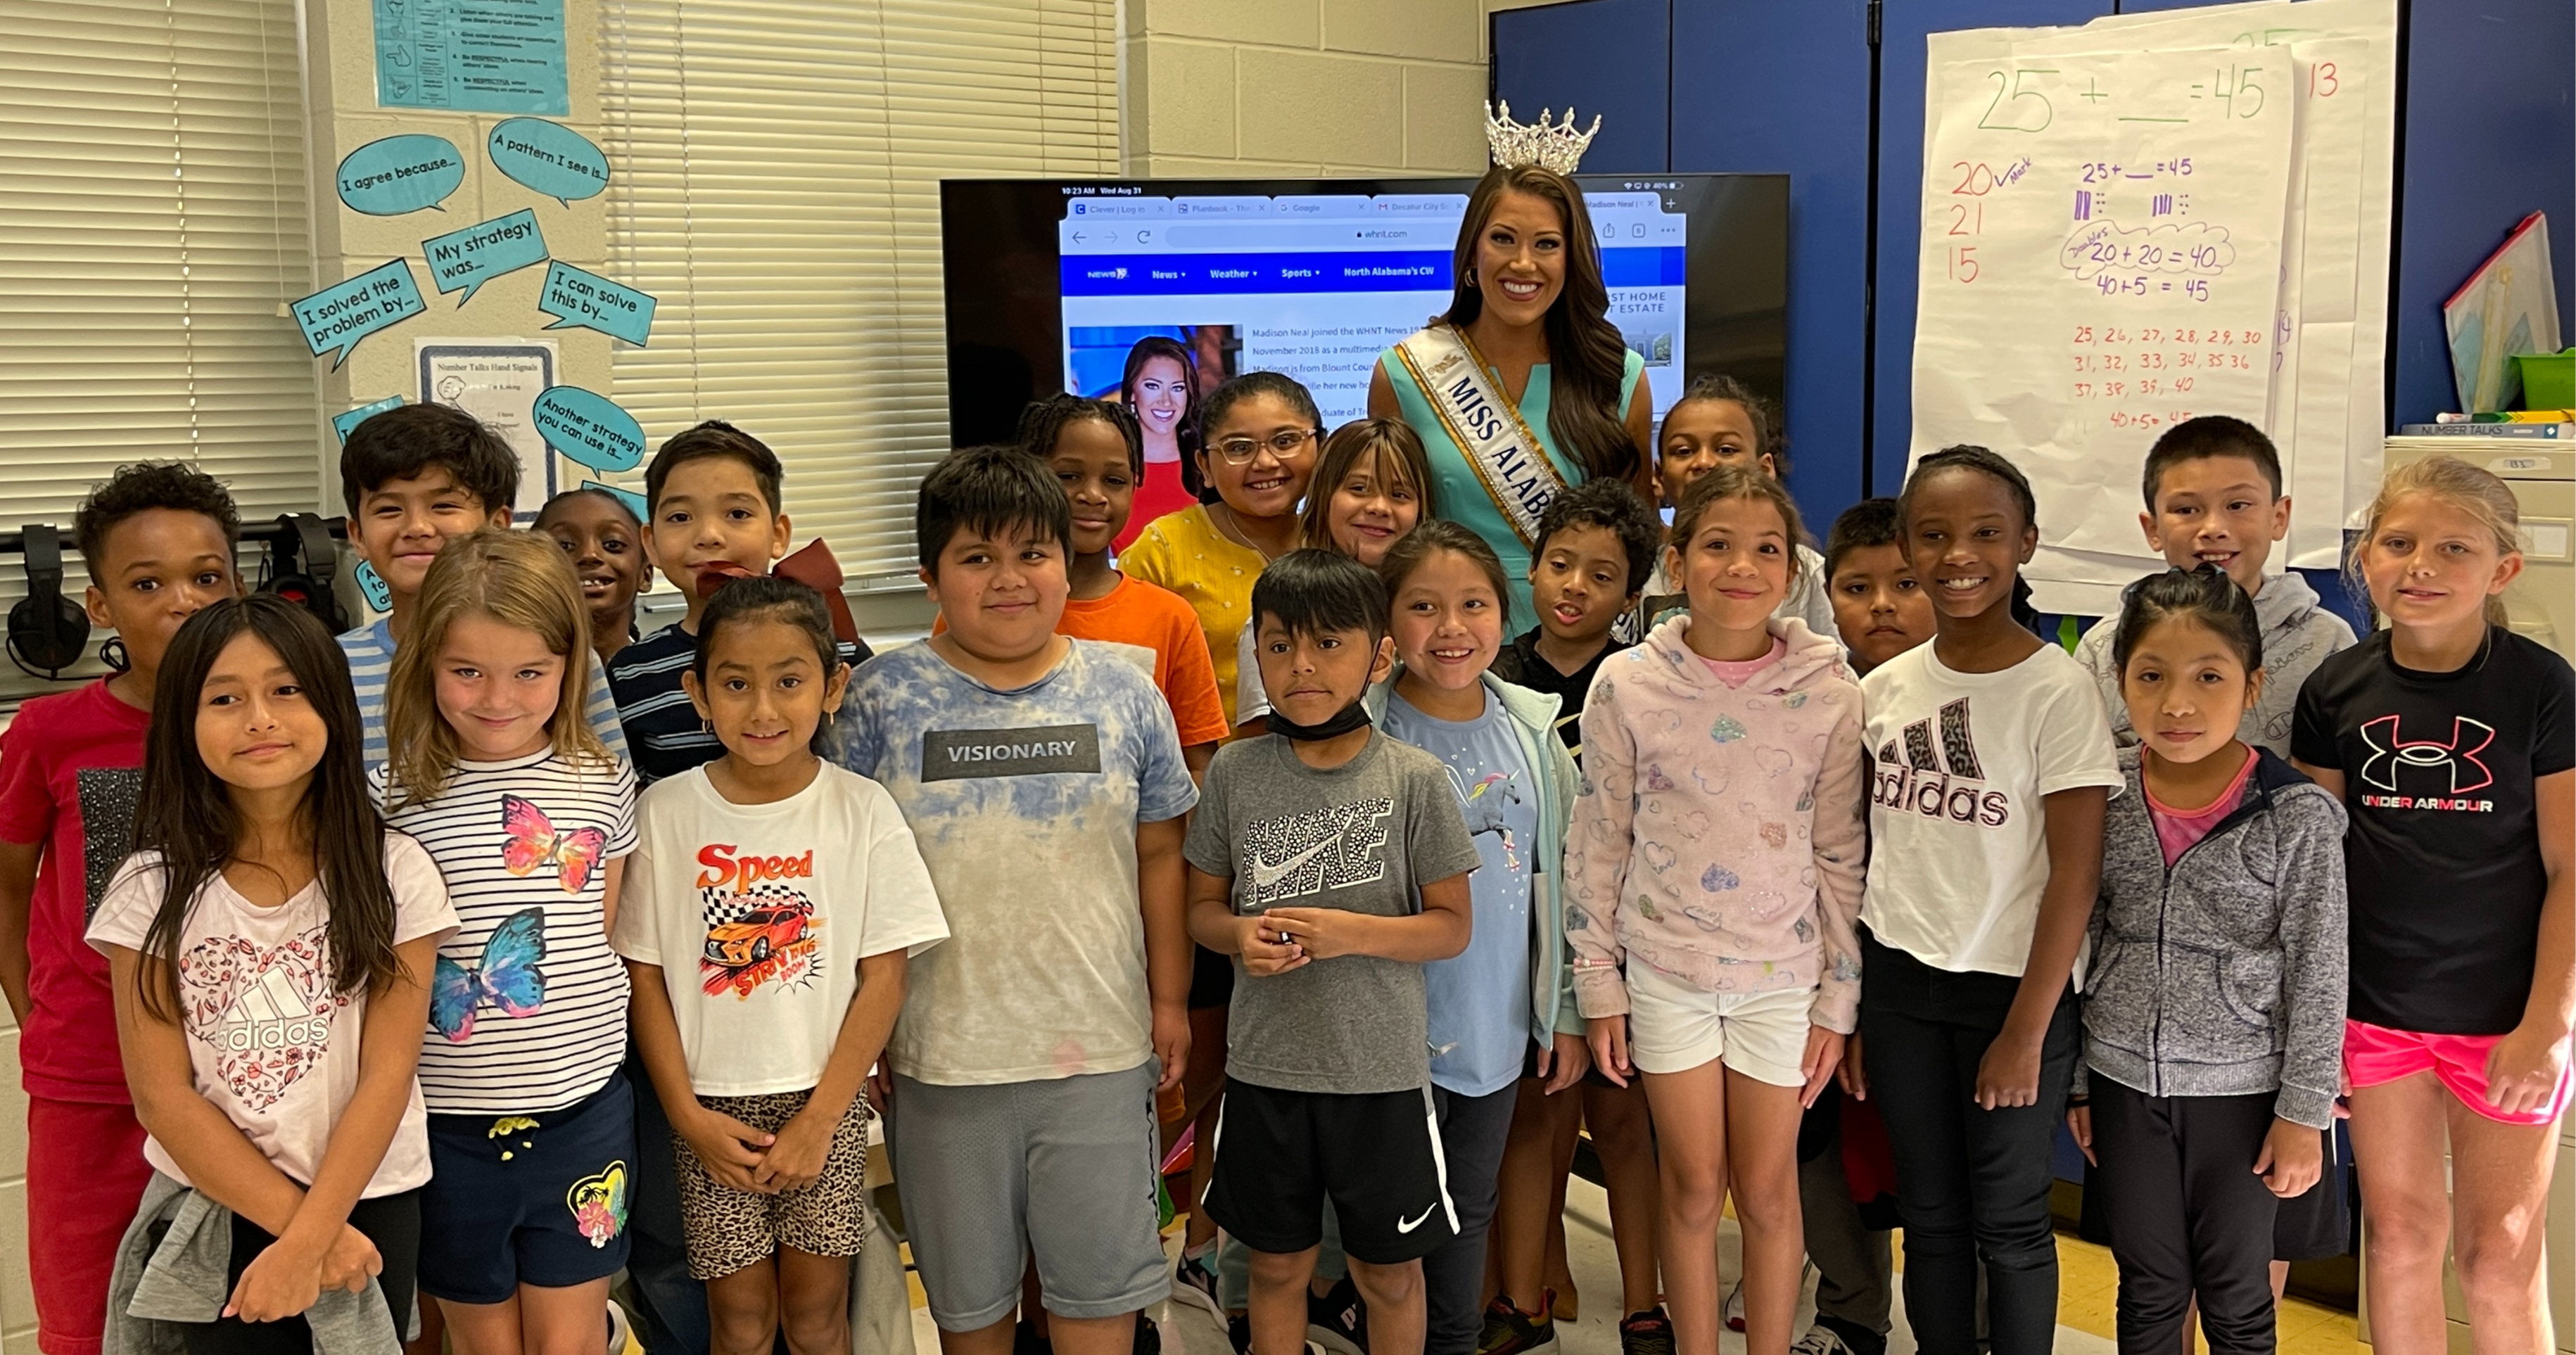 Miss AL Volunteer takes group picture with students